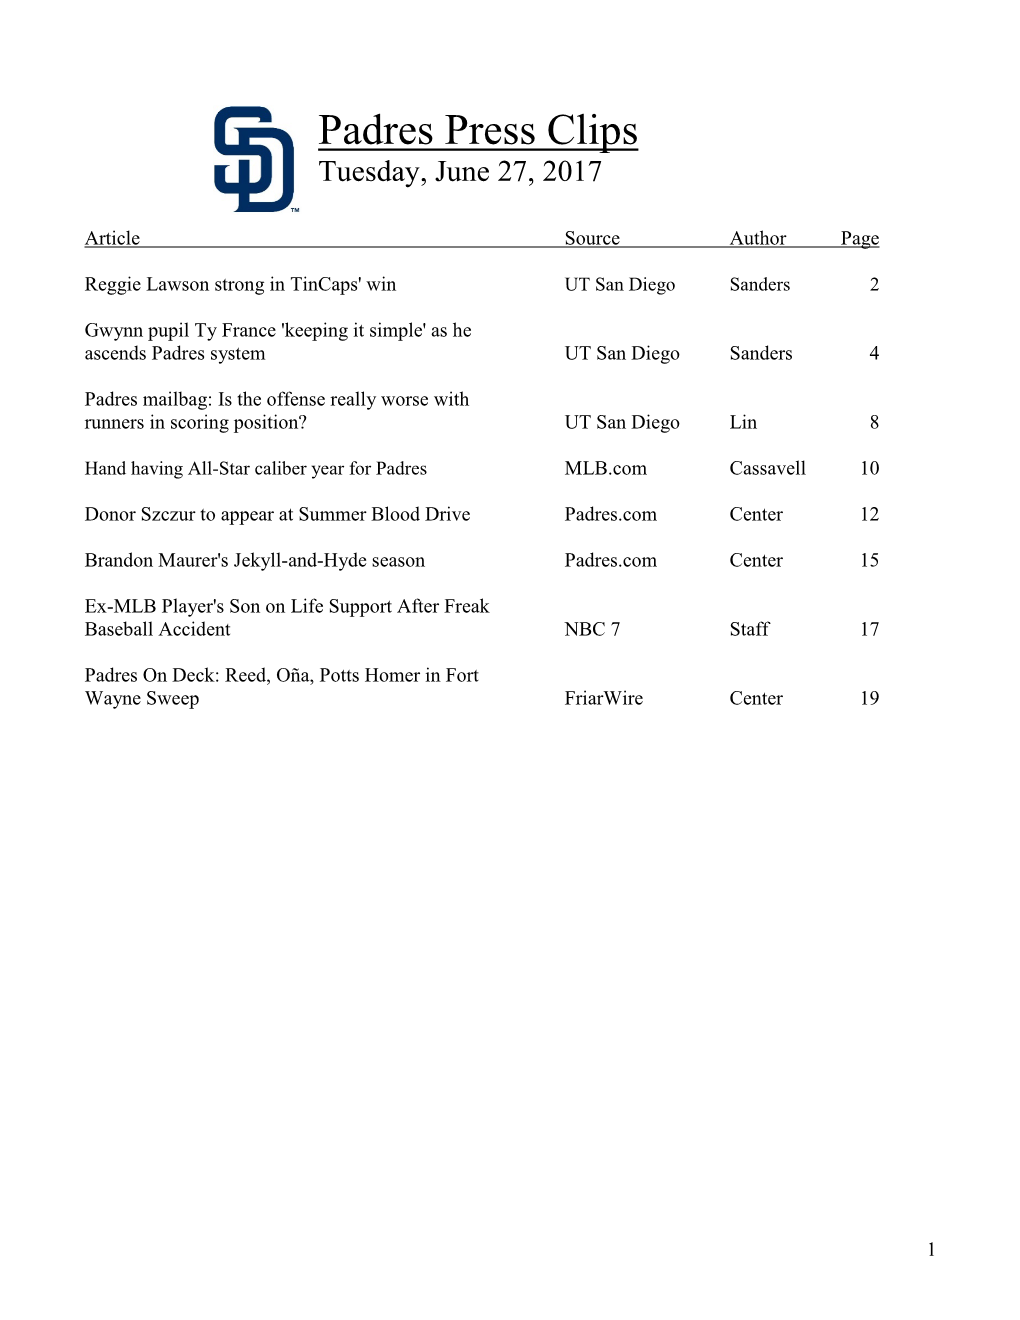 Padres Press Clips Tuesday, June 27, 2017